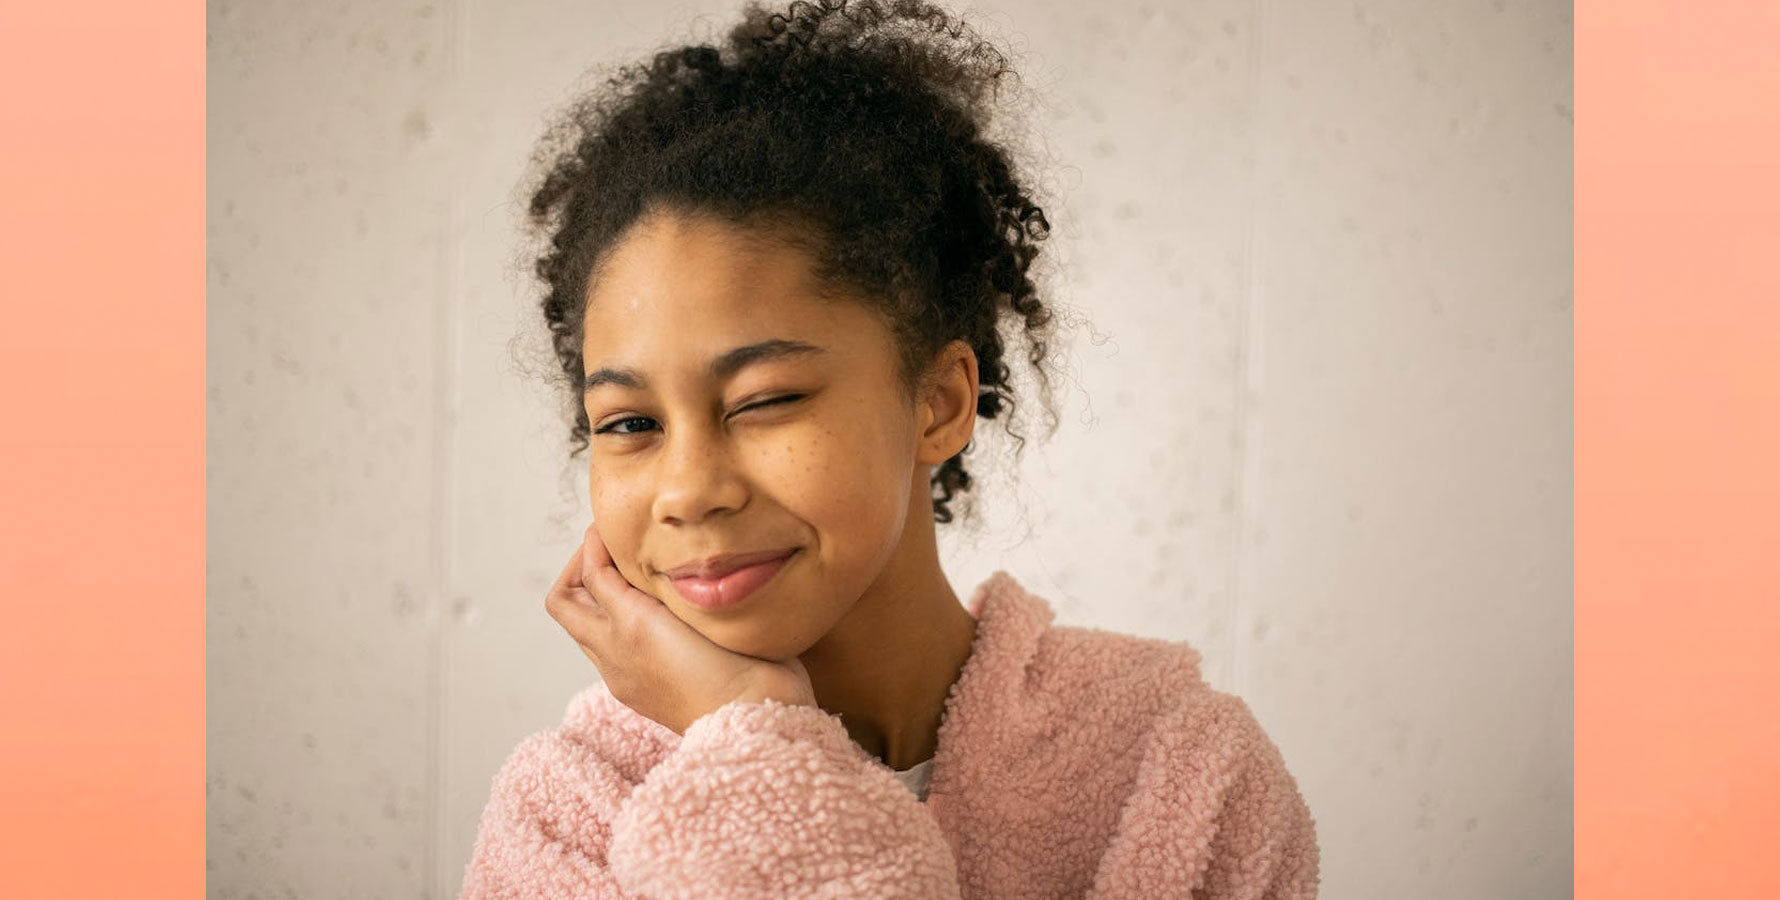 Young Black woman smiling at camera and winking. Cerm Skin Azelaic vs Niacinamide blog post. Photo by Monstera Production: https://www.pexels.com/photo/cheerful-black-girl-winking-at-camera-7114452/